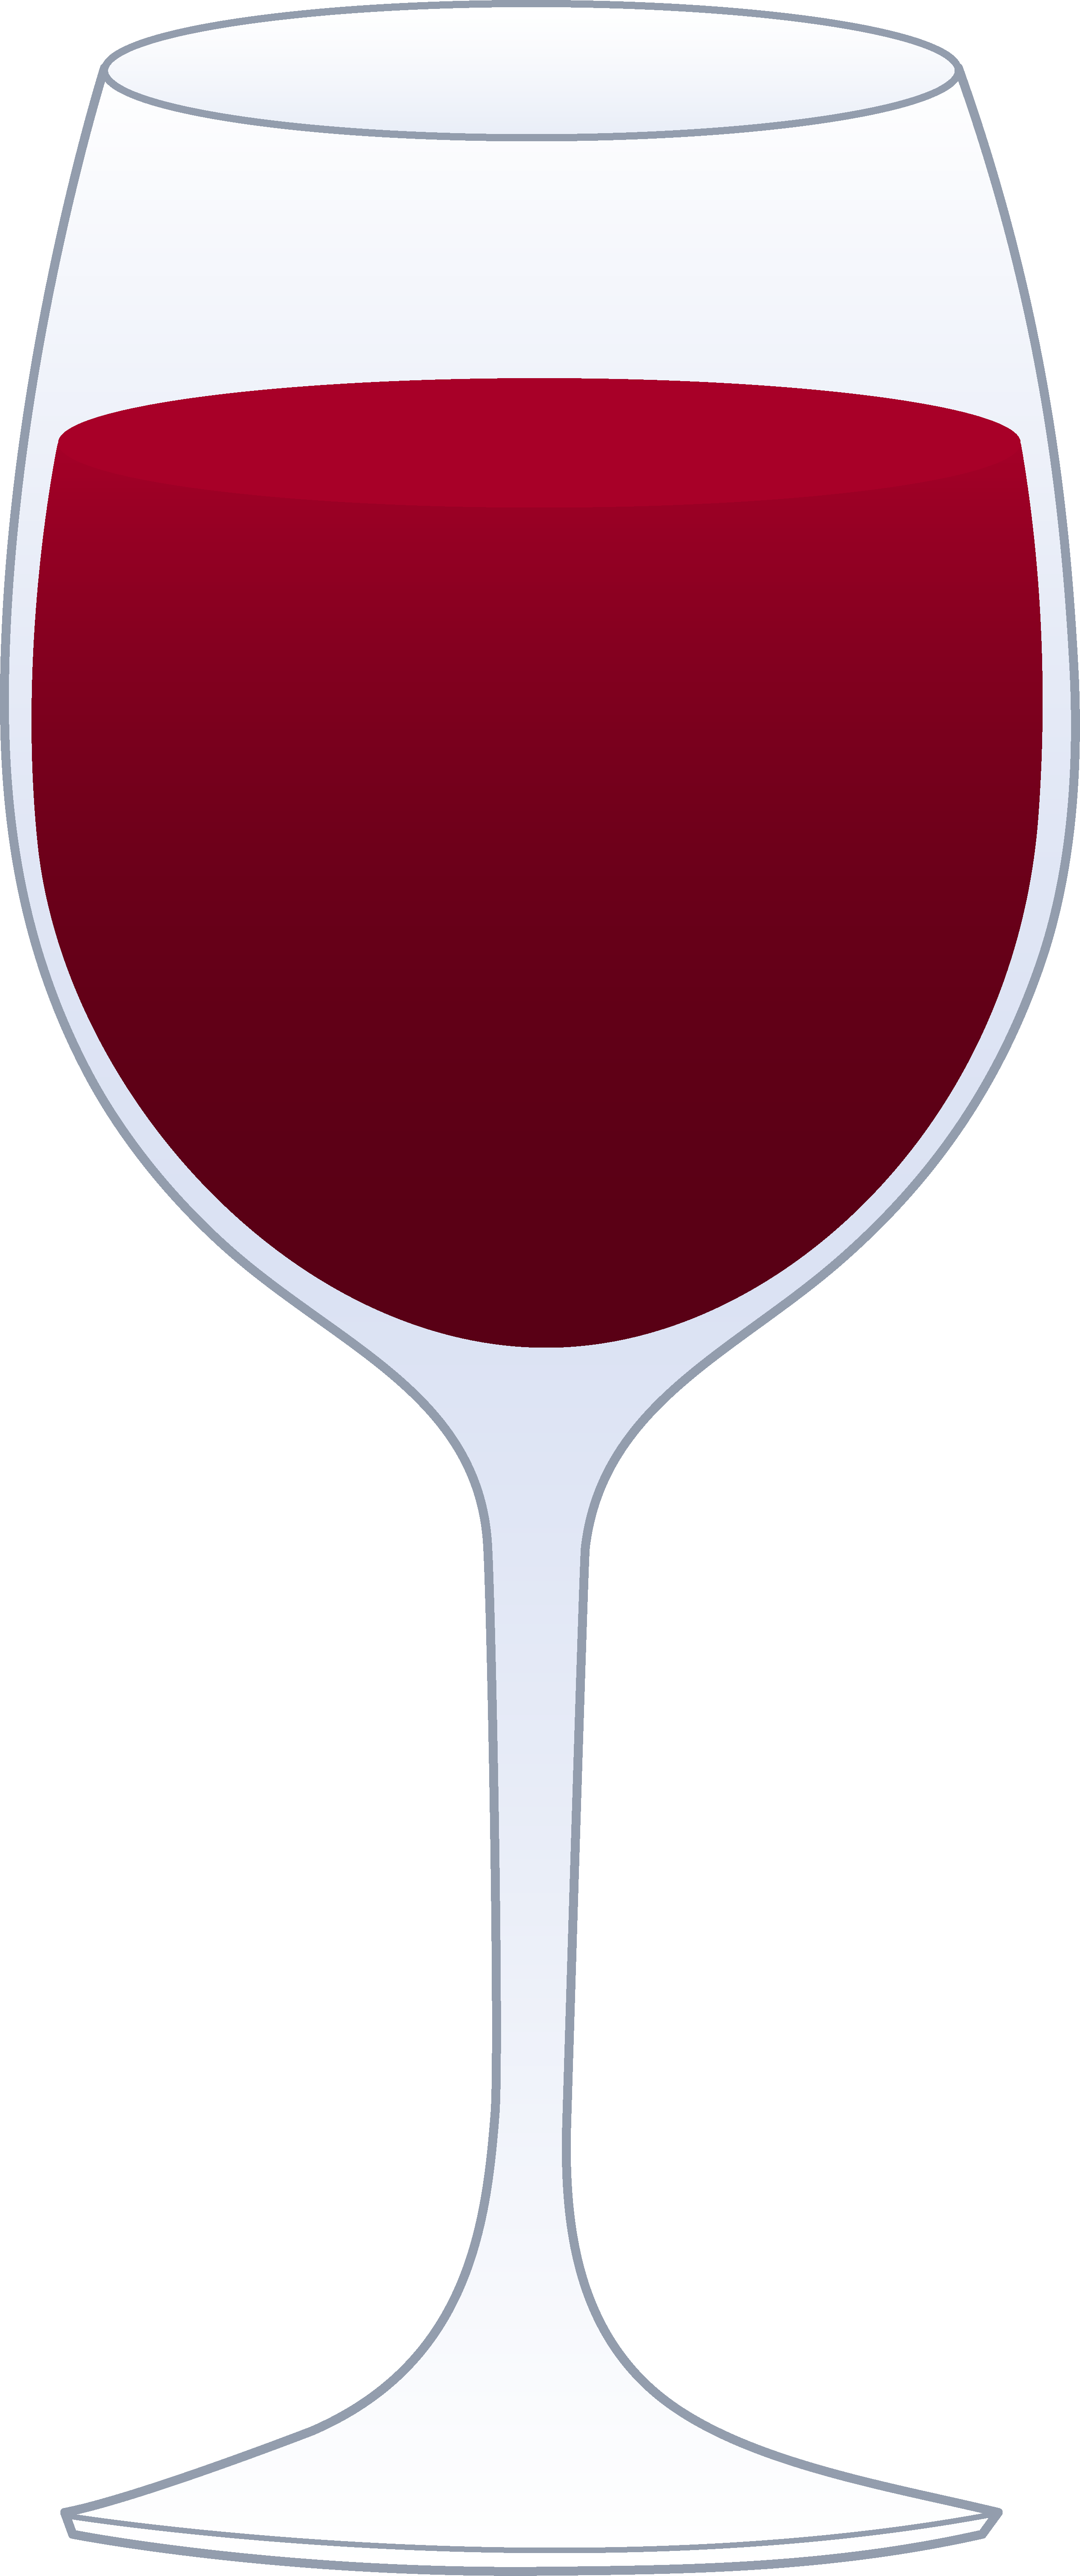 Glass Of Red Wine - Free Clip Art - Cliparts.